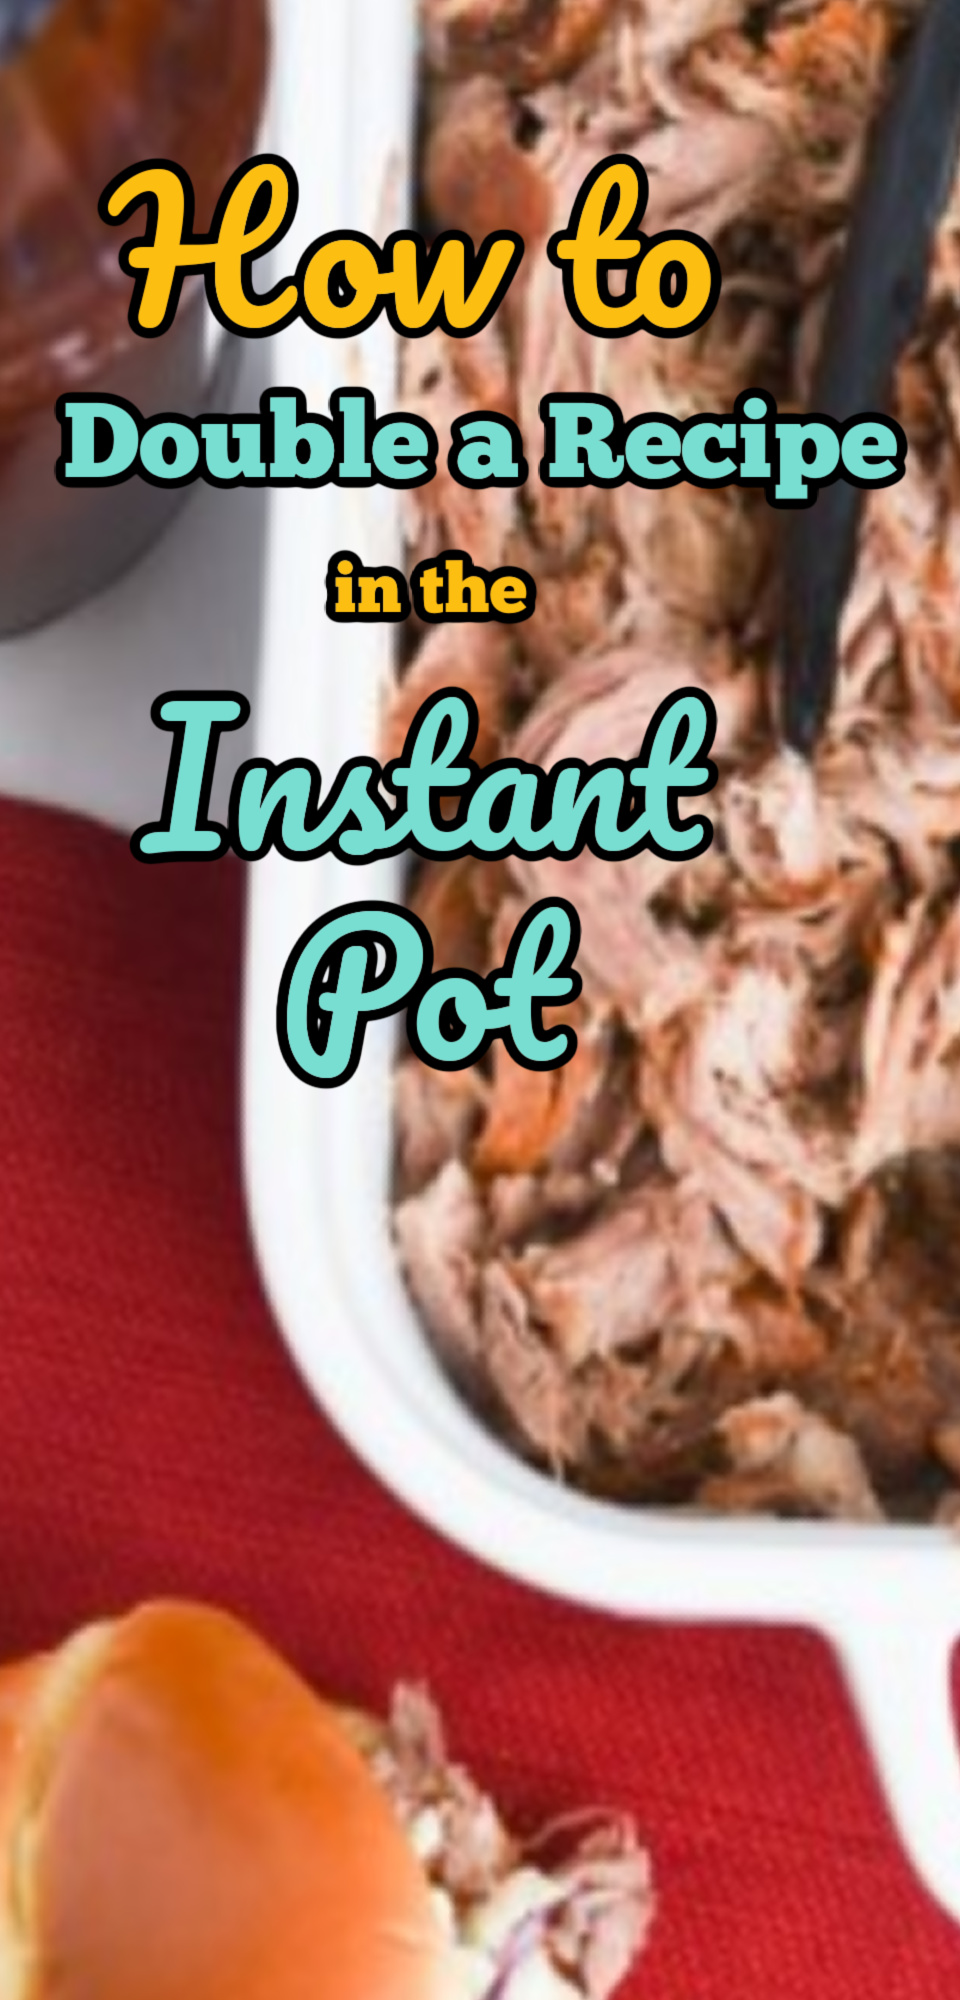 How to Double A Recipe in the Instant Pot